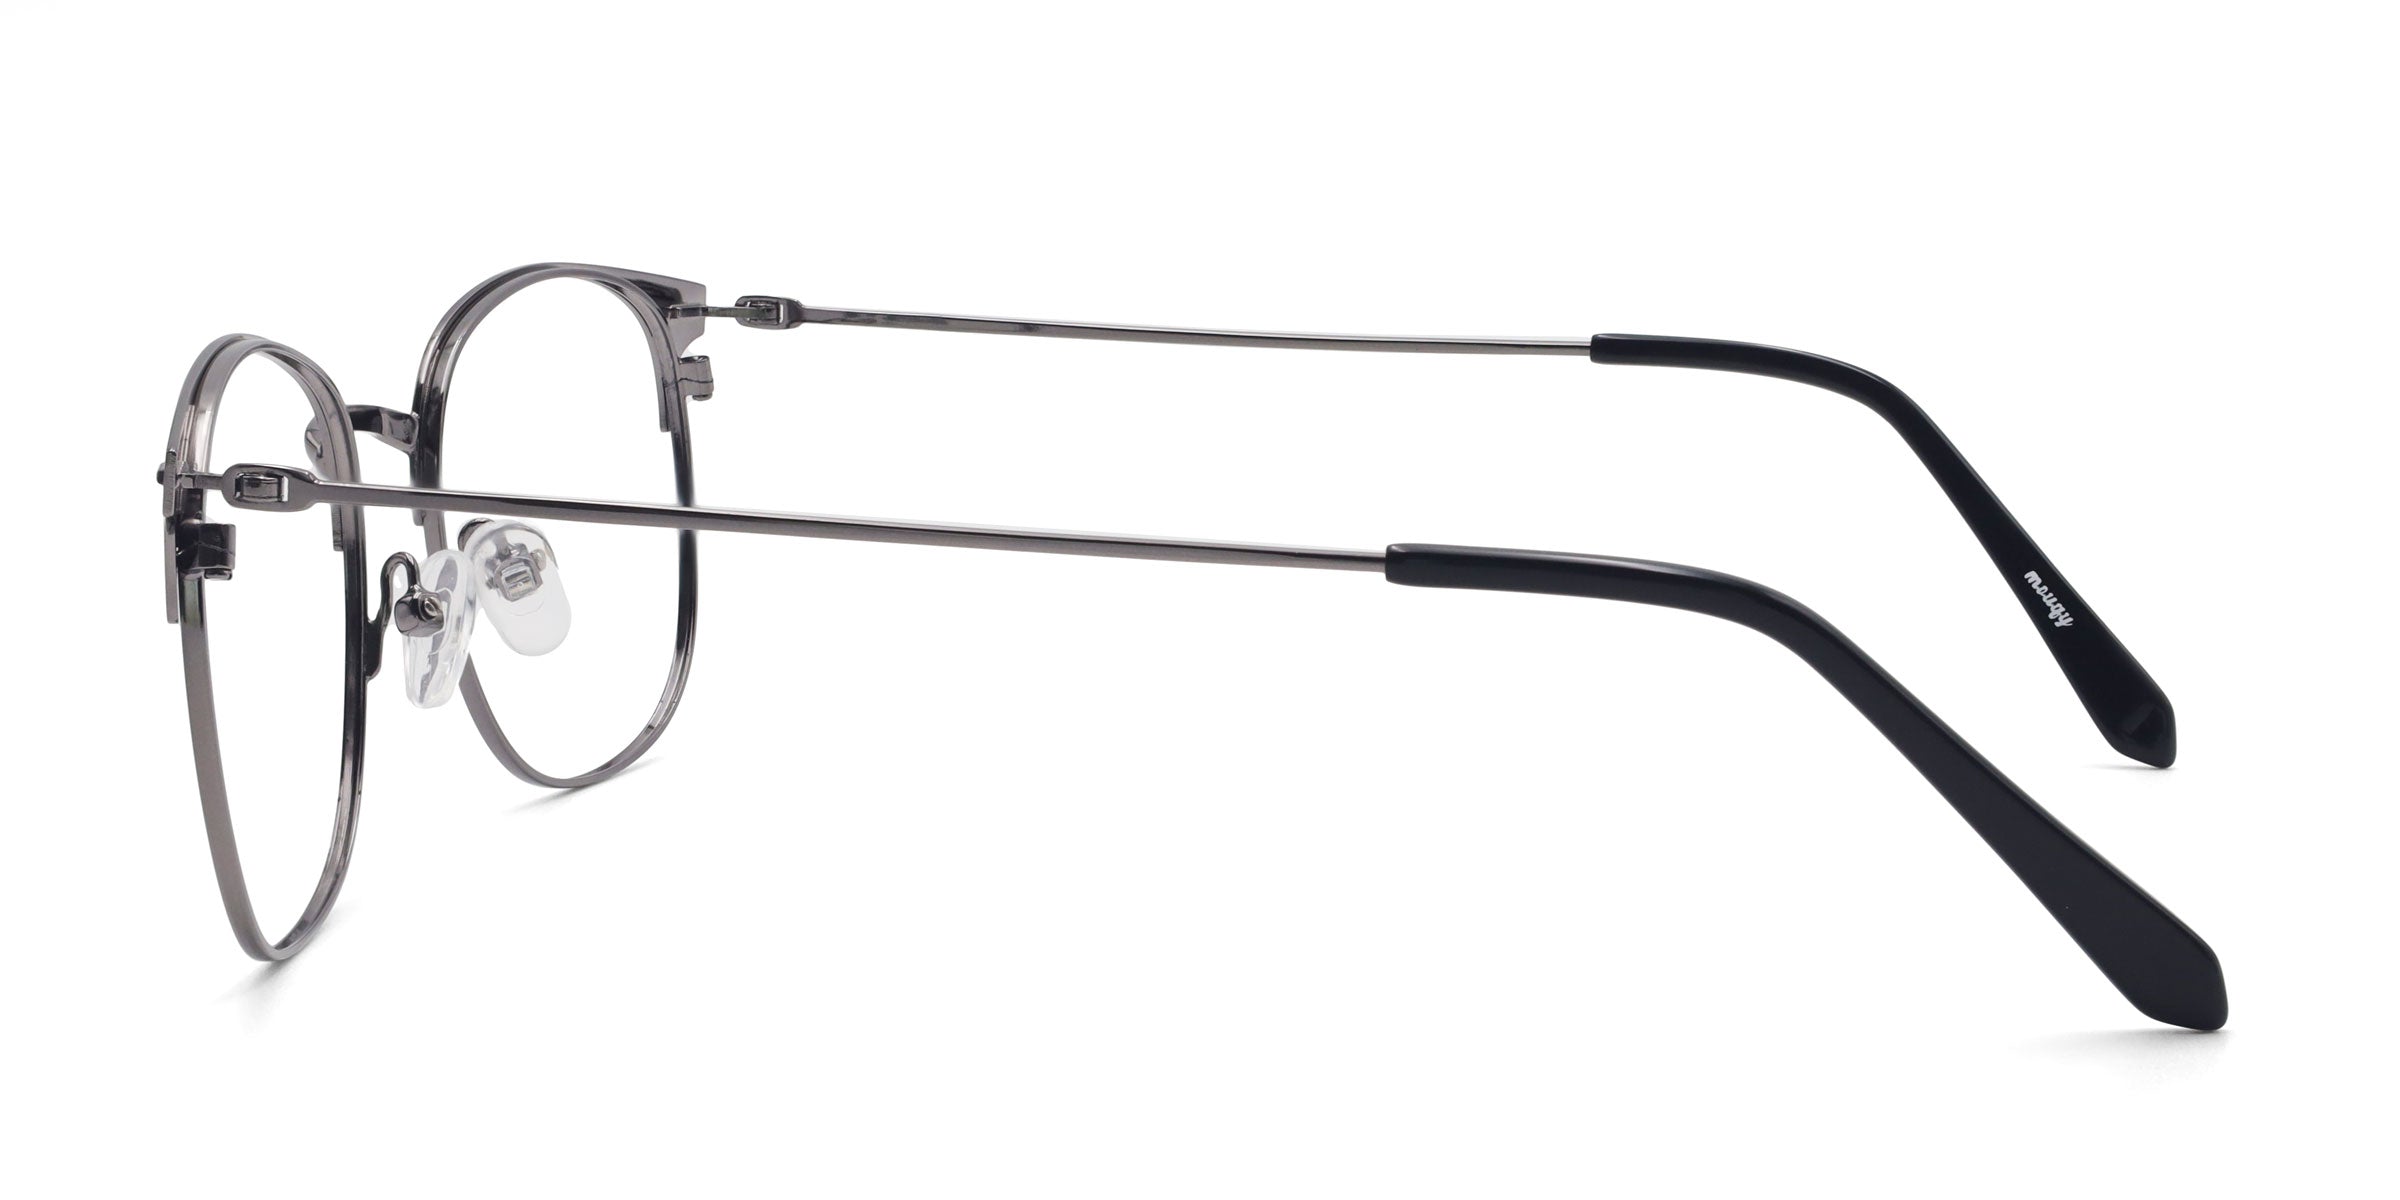 Isotonic Browline Silver eyeglasses frames side view